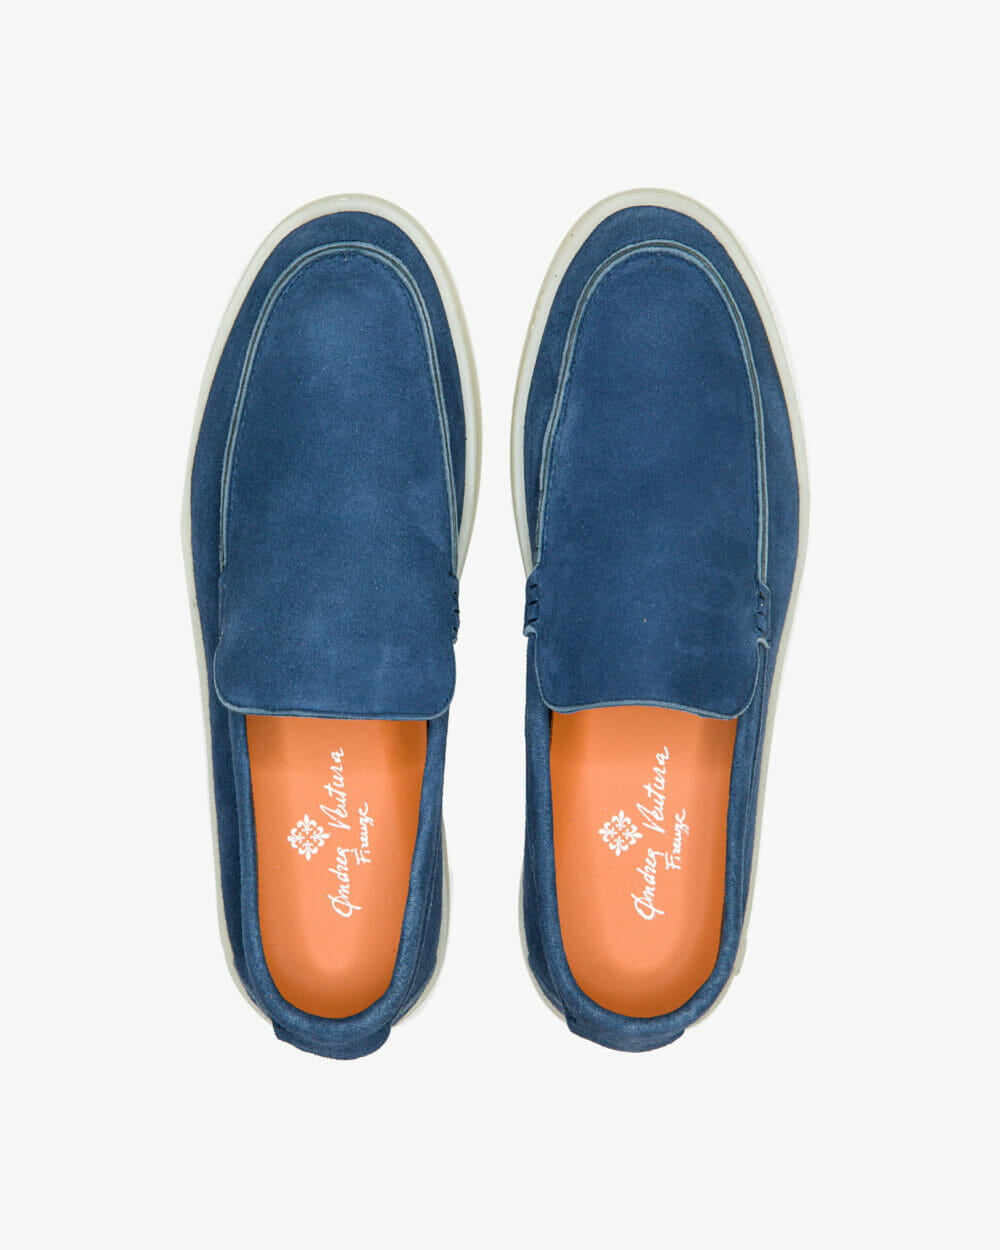 St-Bart-LS-blue-navy-suede-from-above